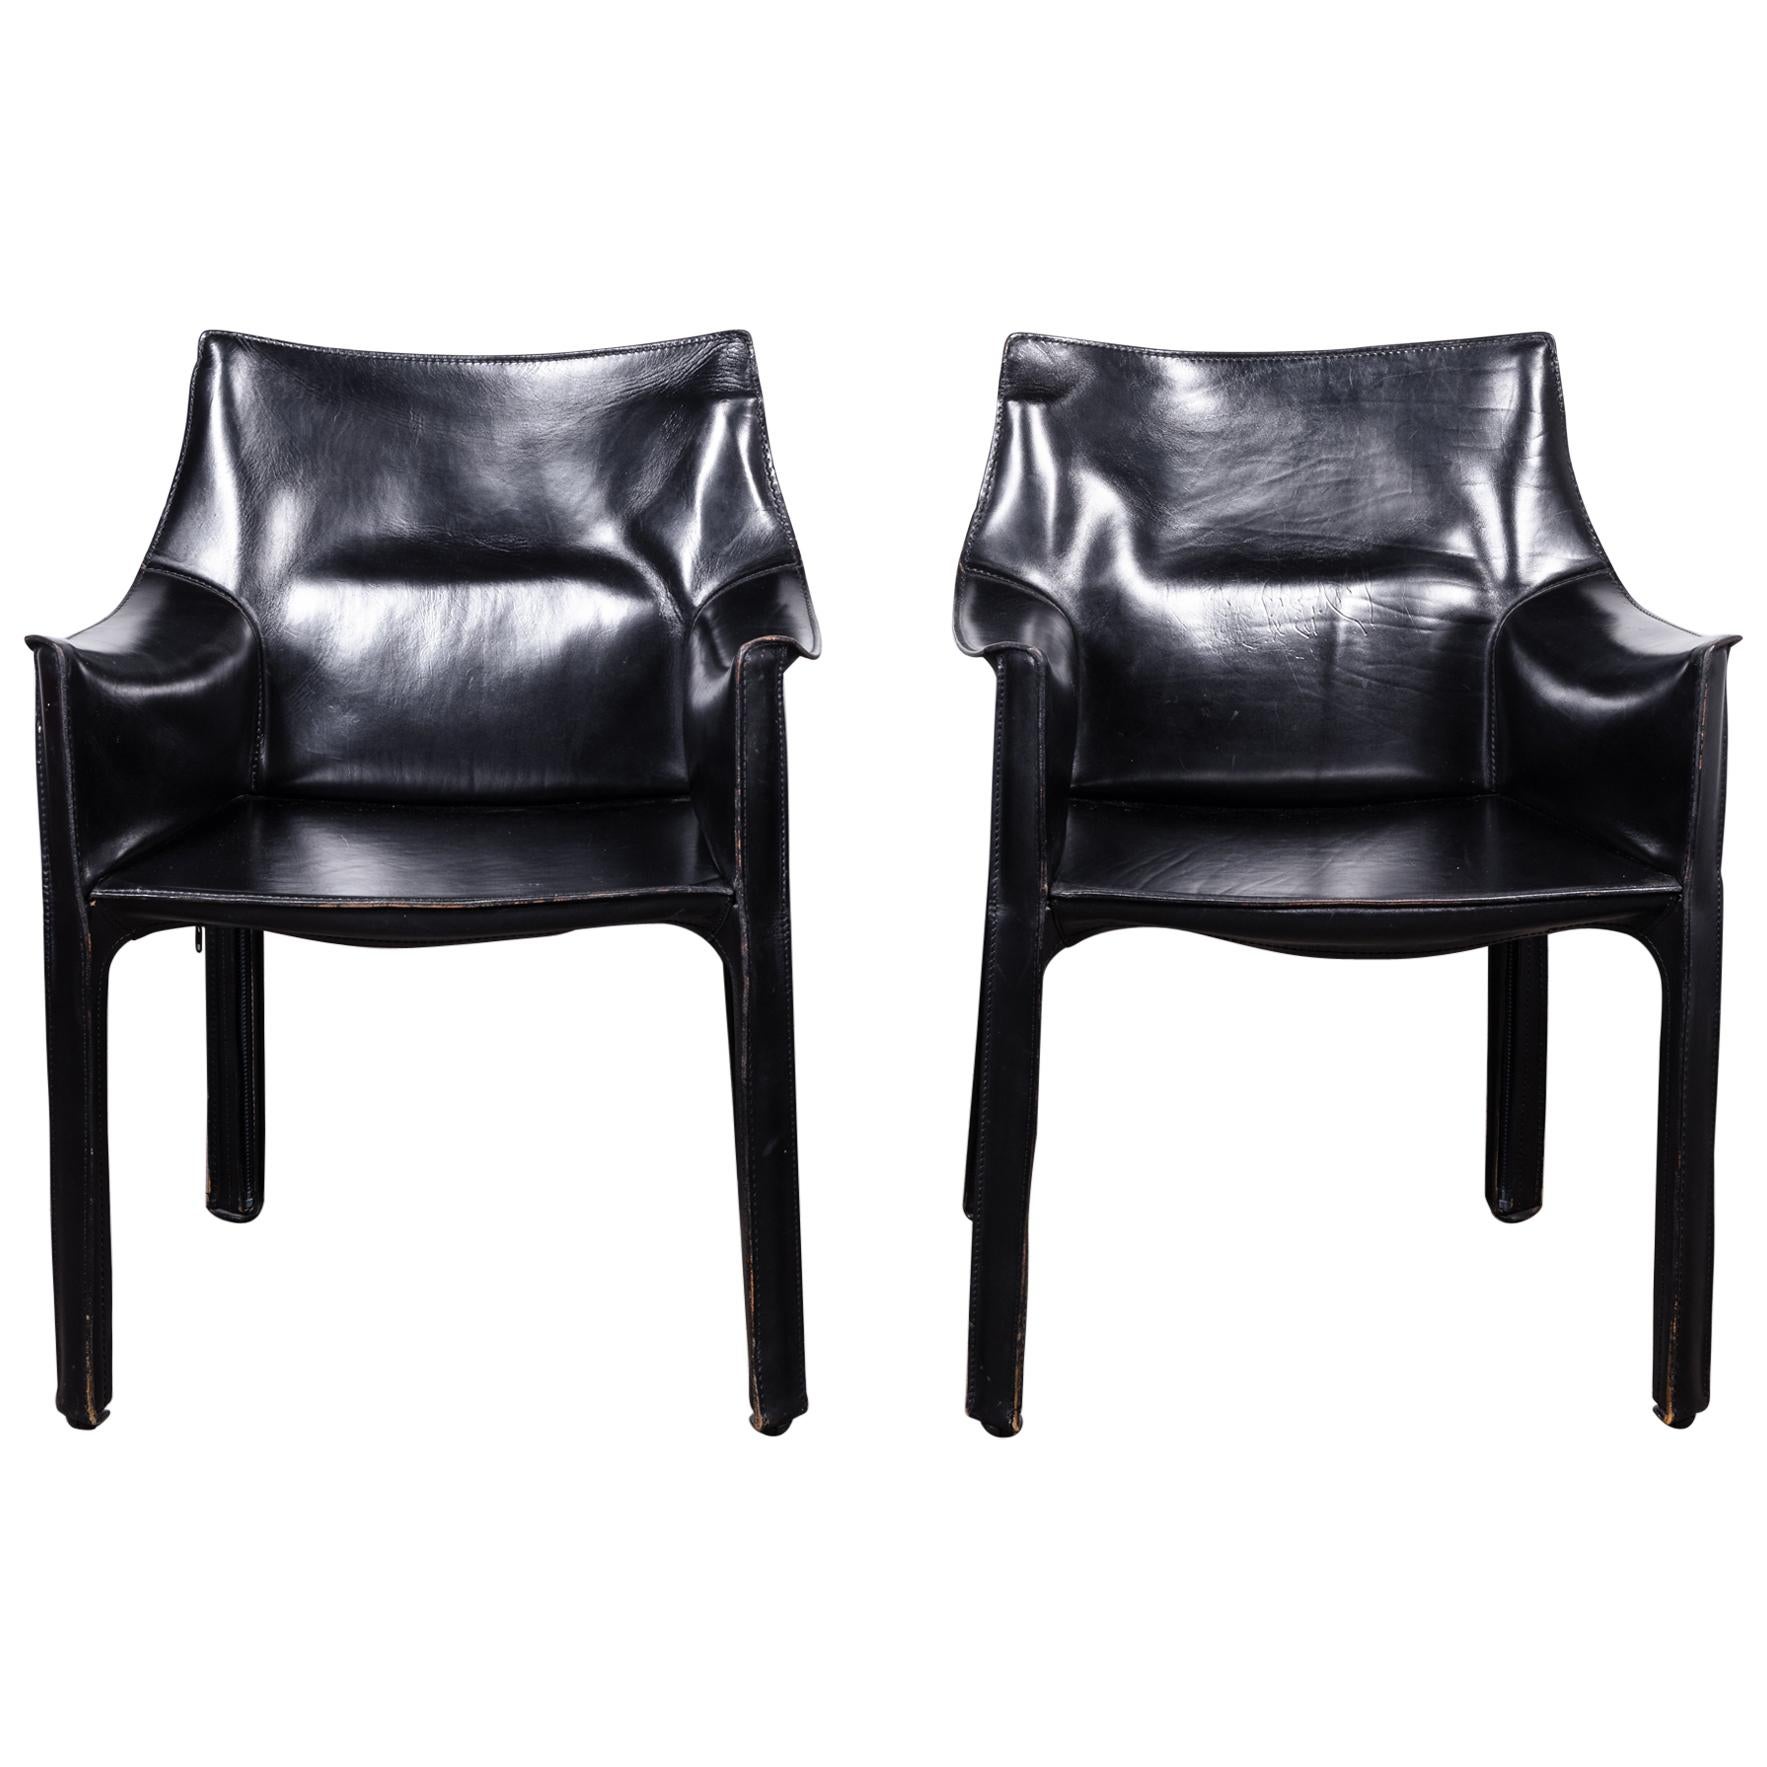 Set of 2 Mario Bellini CAB 414 Chairs in Black Leather for Cassina